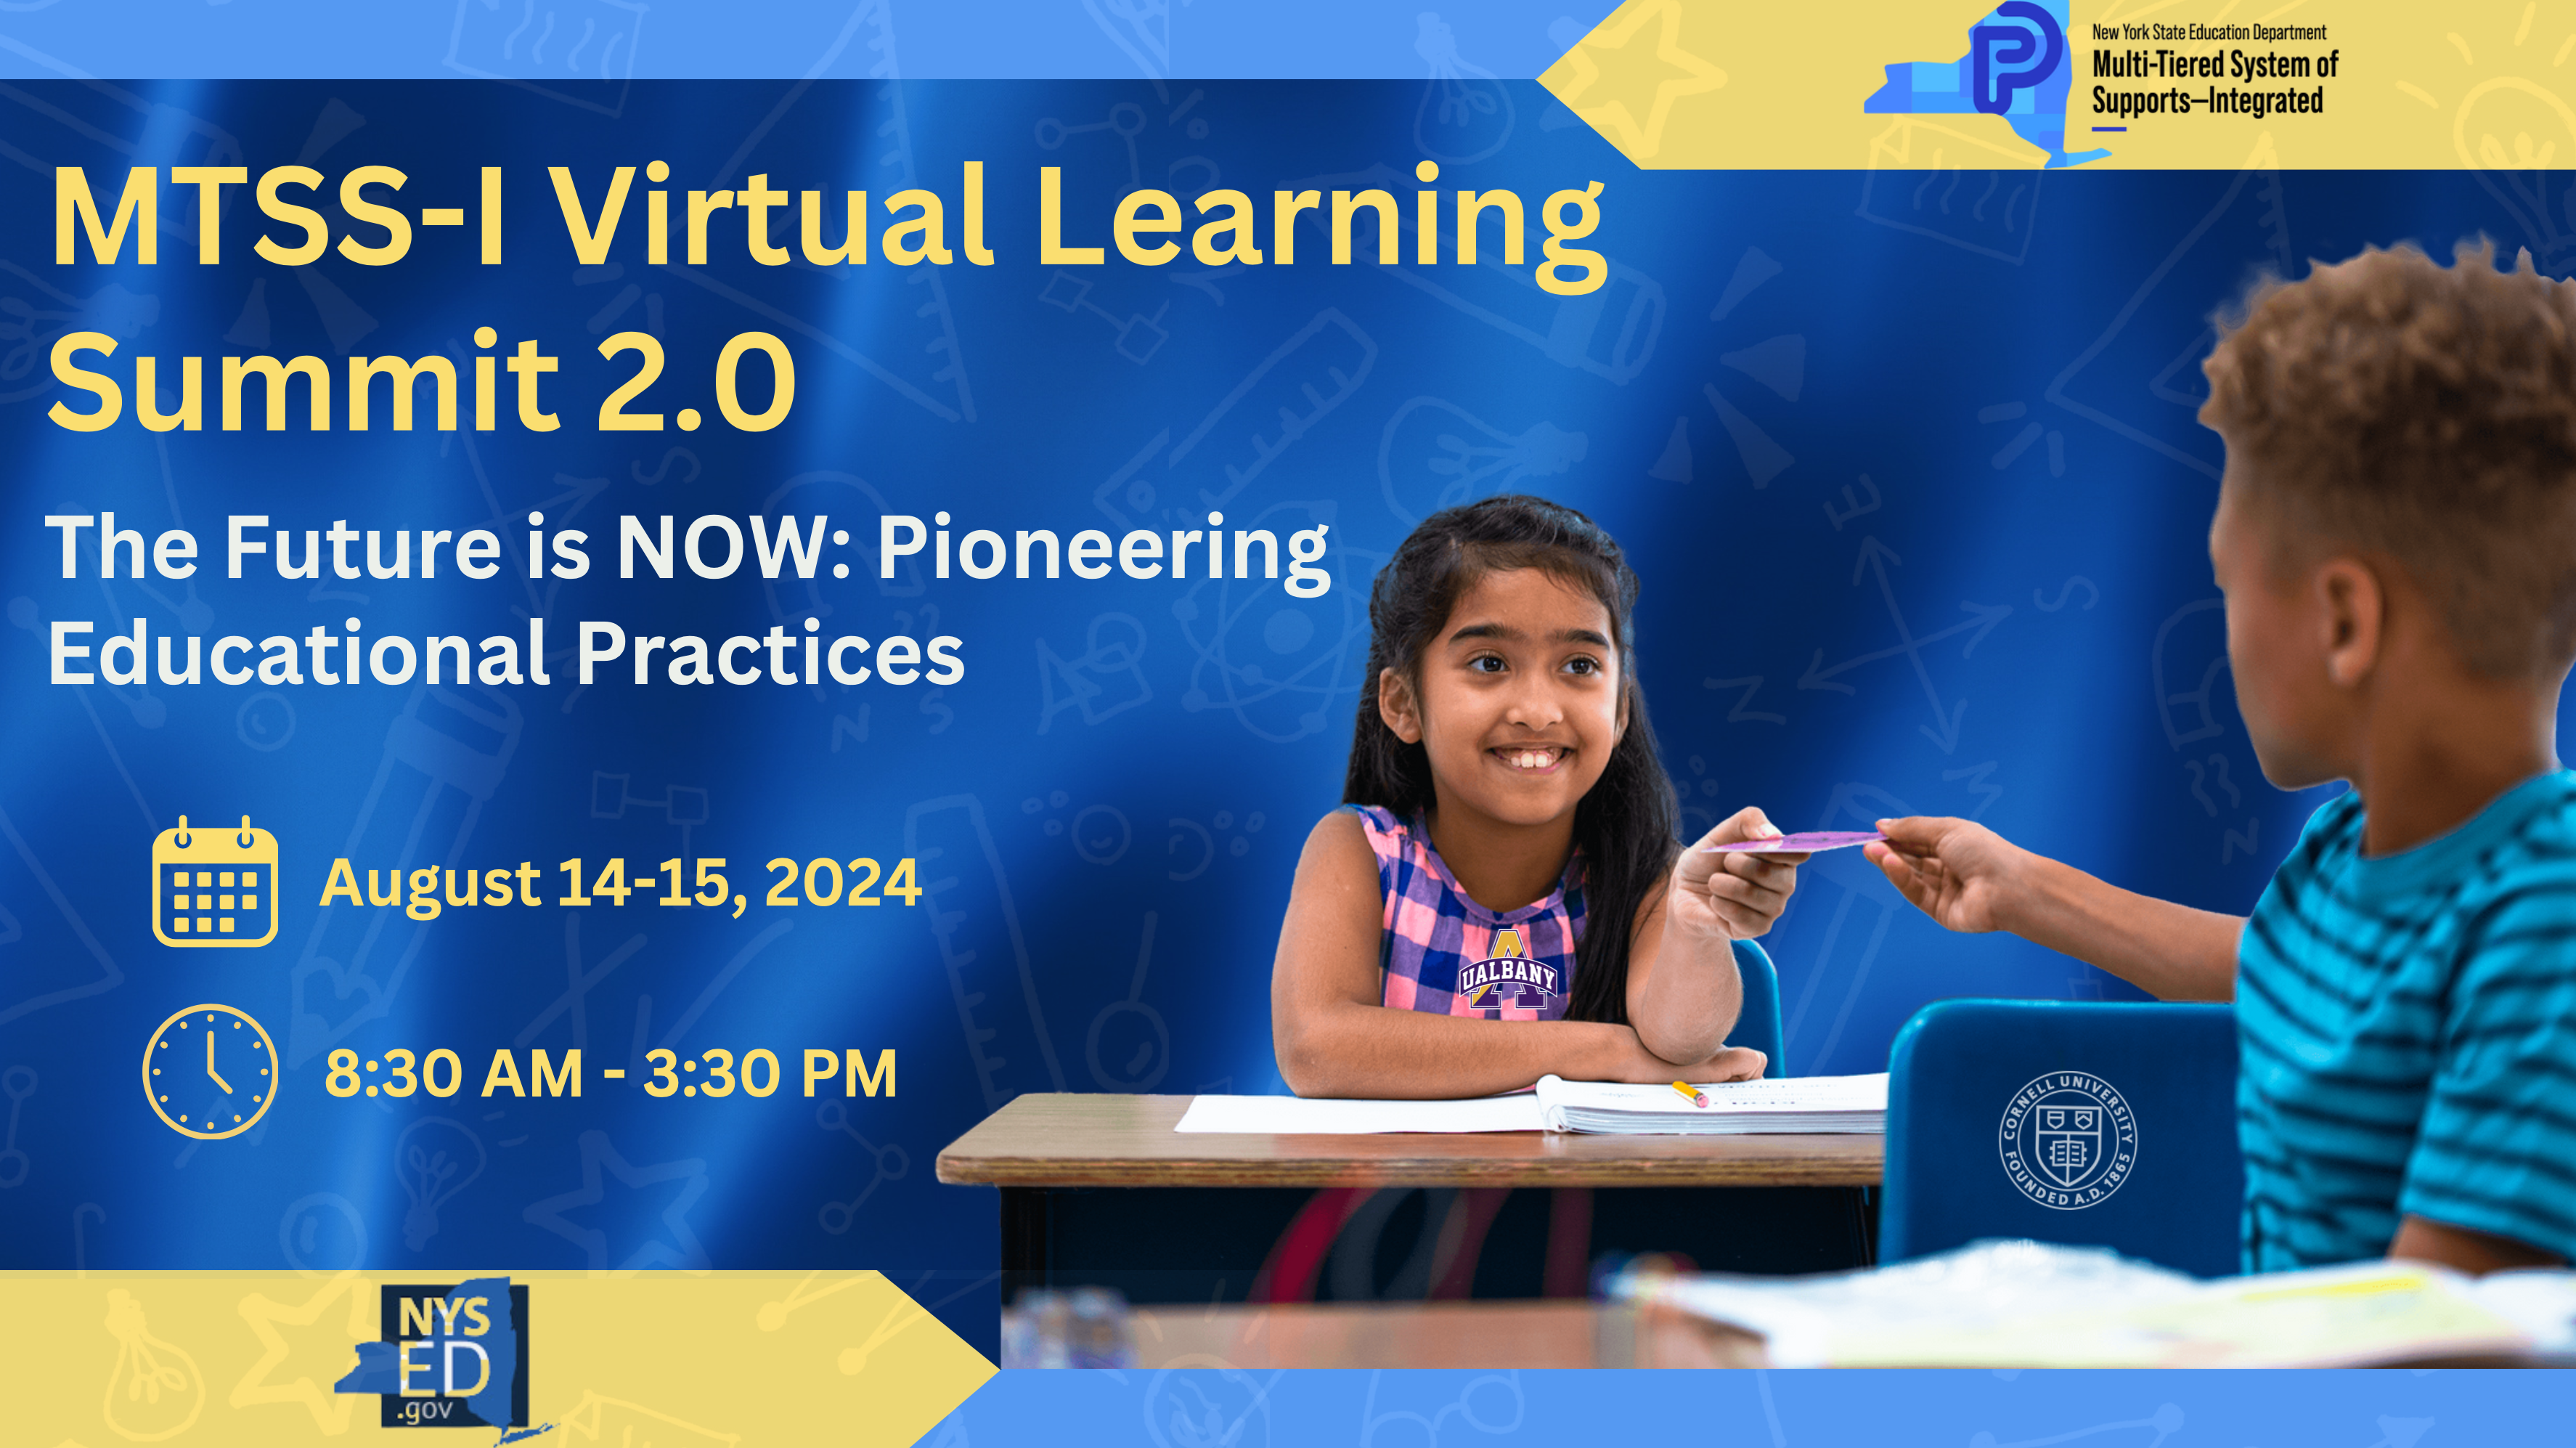 promotional flyer for virtual learning summit 2.0